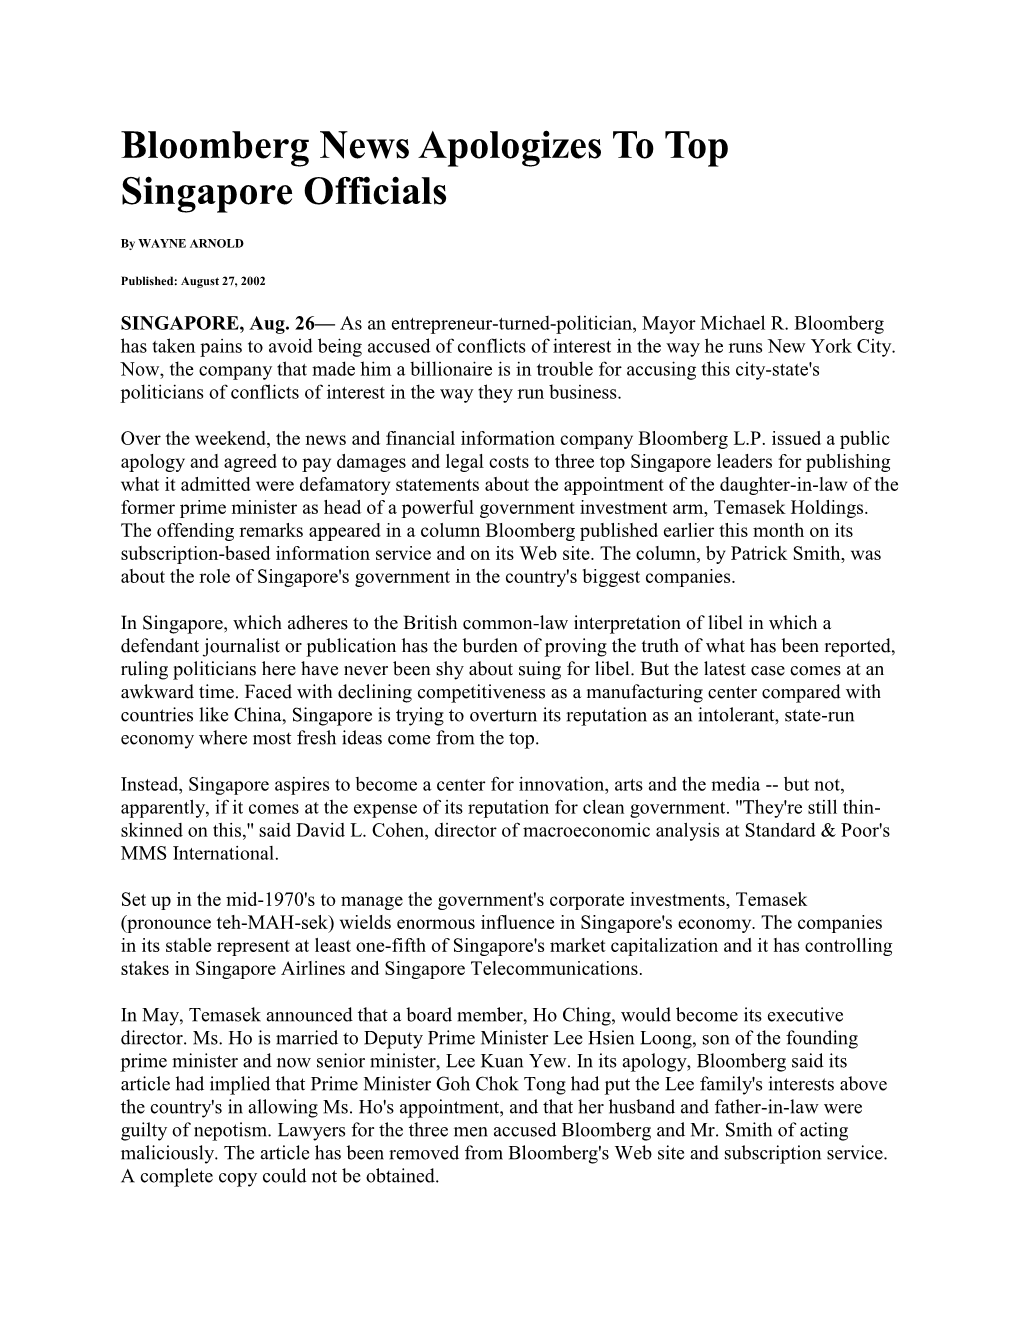 Bloomberg News Apologizes to Top Singapore Officials